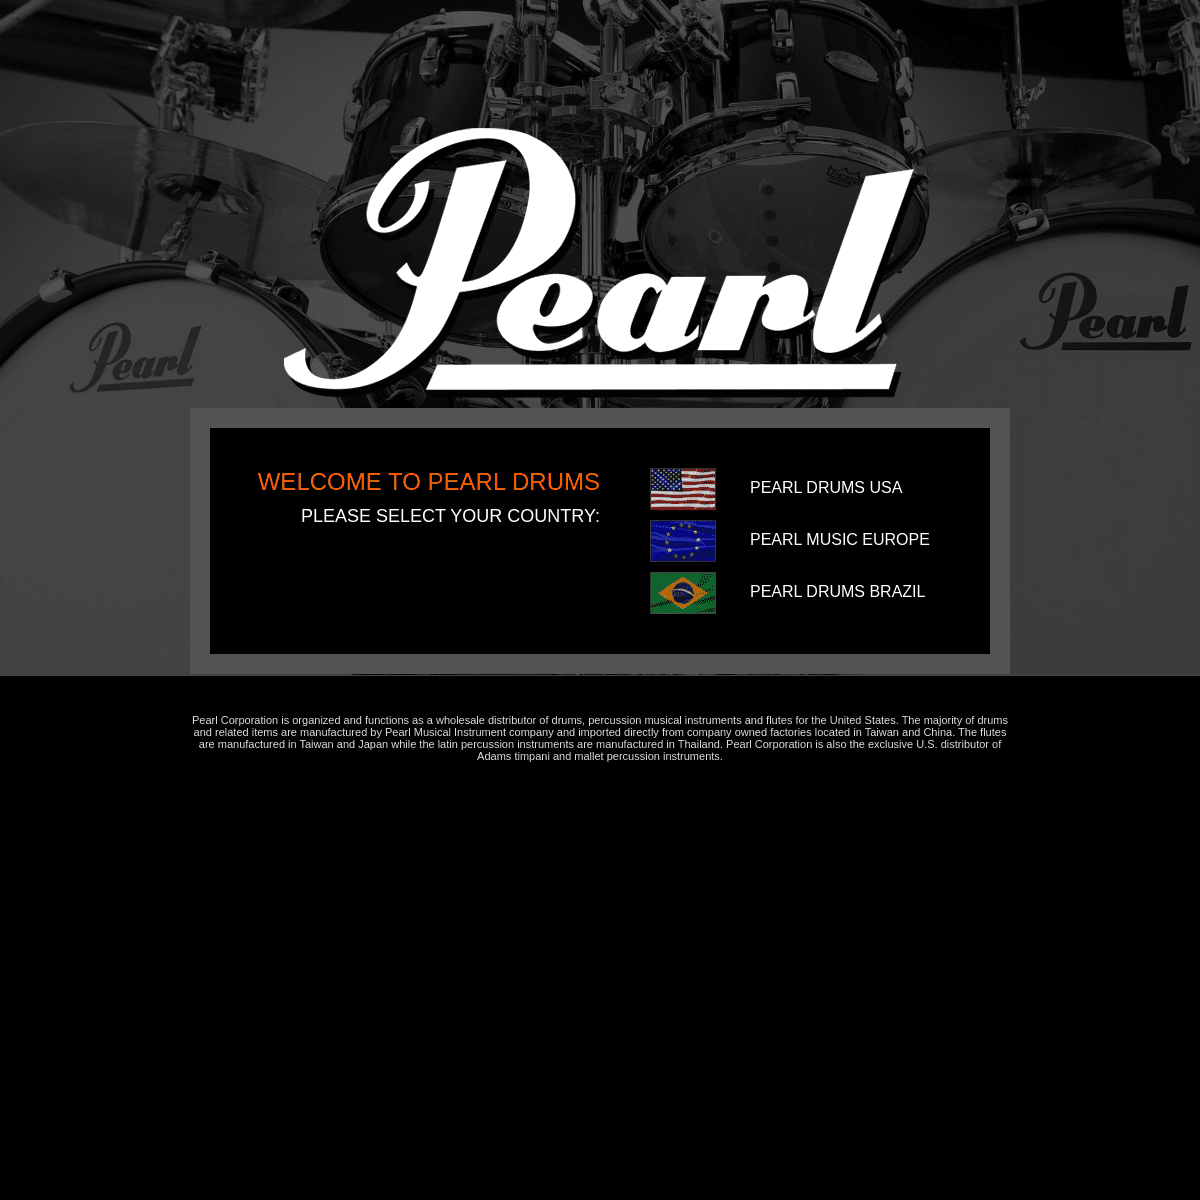 A complete backup of pearldrum.com